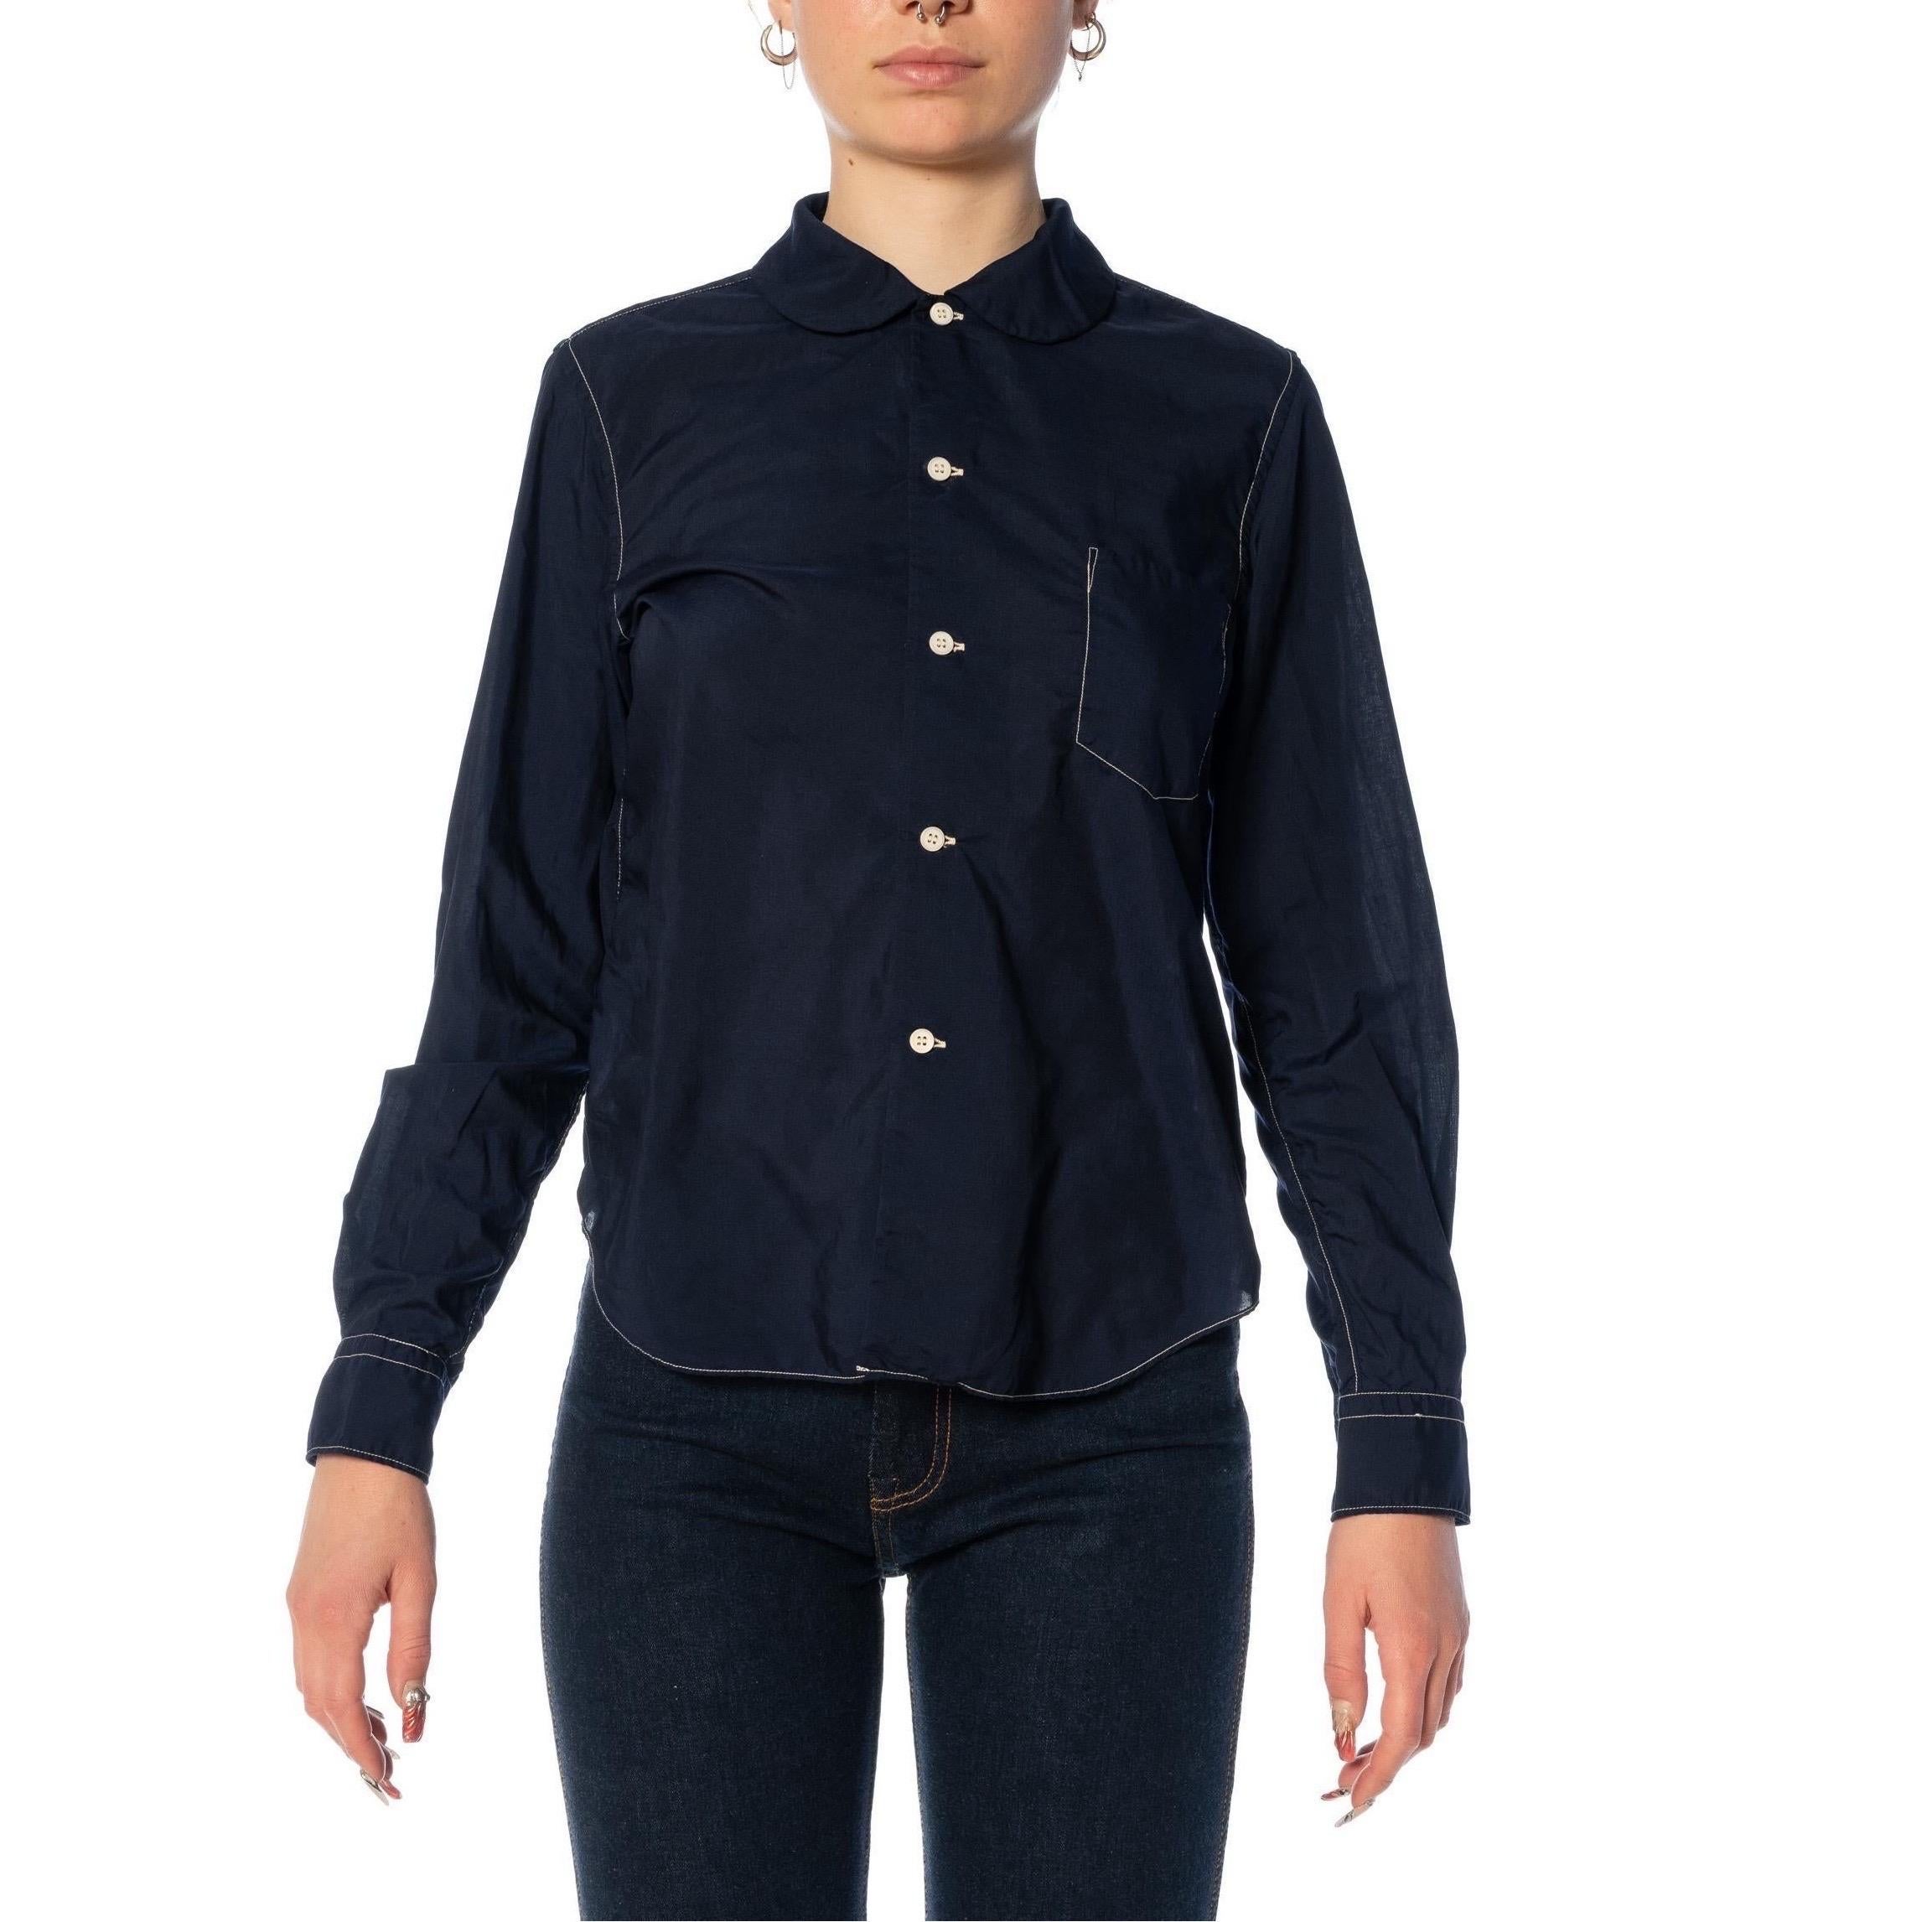 2010S COMME DES GARCONS Midnight Blue Polyester Long Sleeve Shirt 2015 In Excellent Condition For Sale In New York, NY